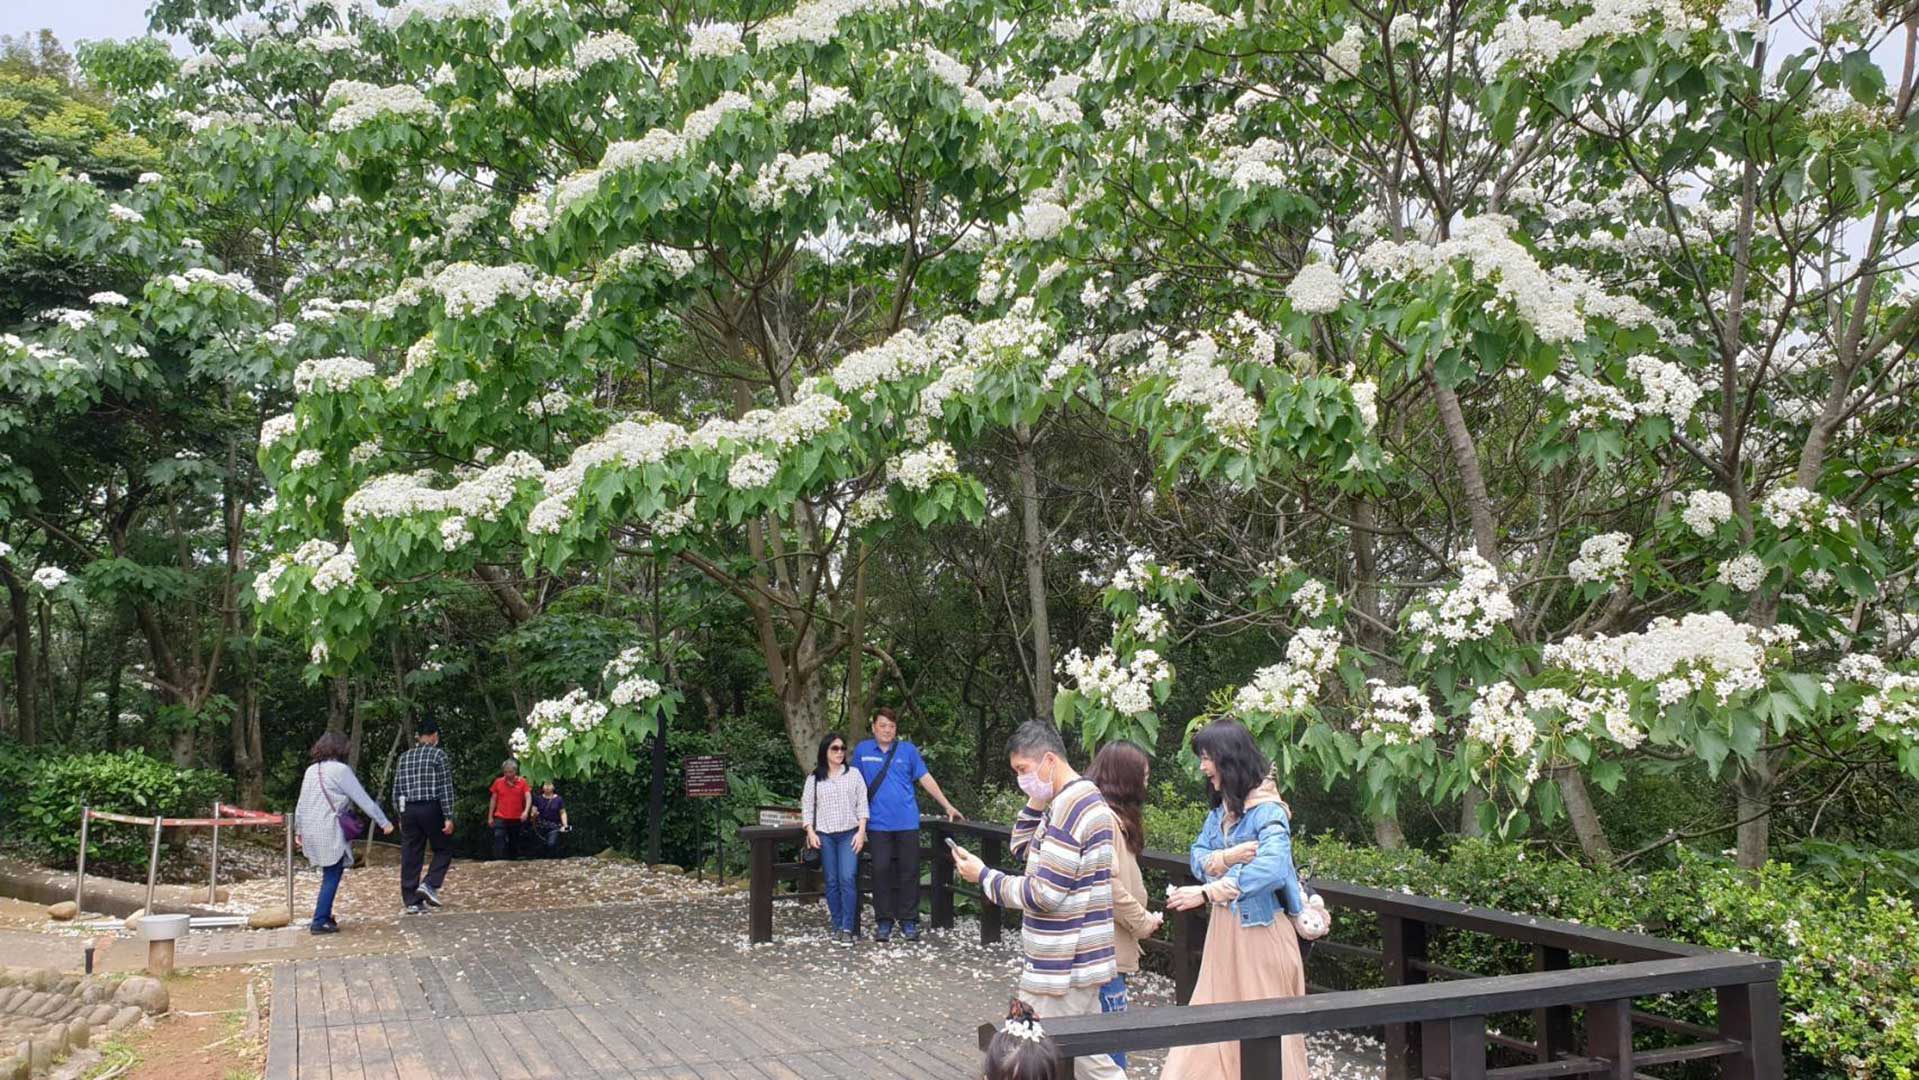 Picture/visitors viewing the flowers